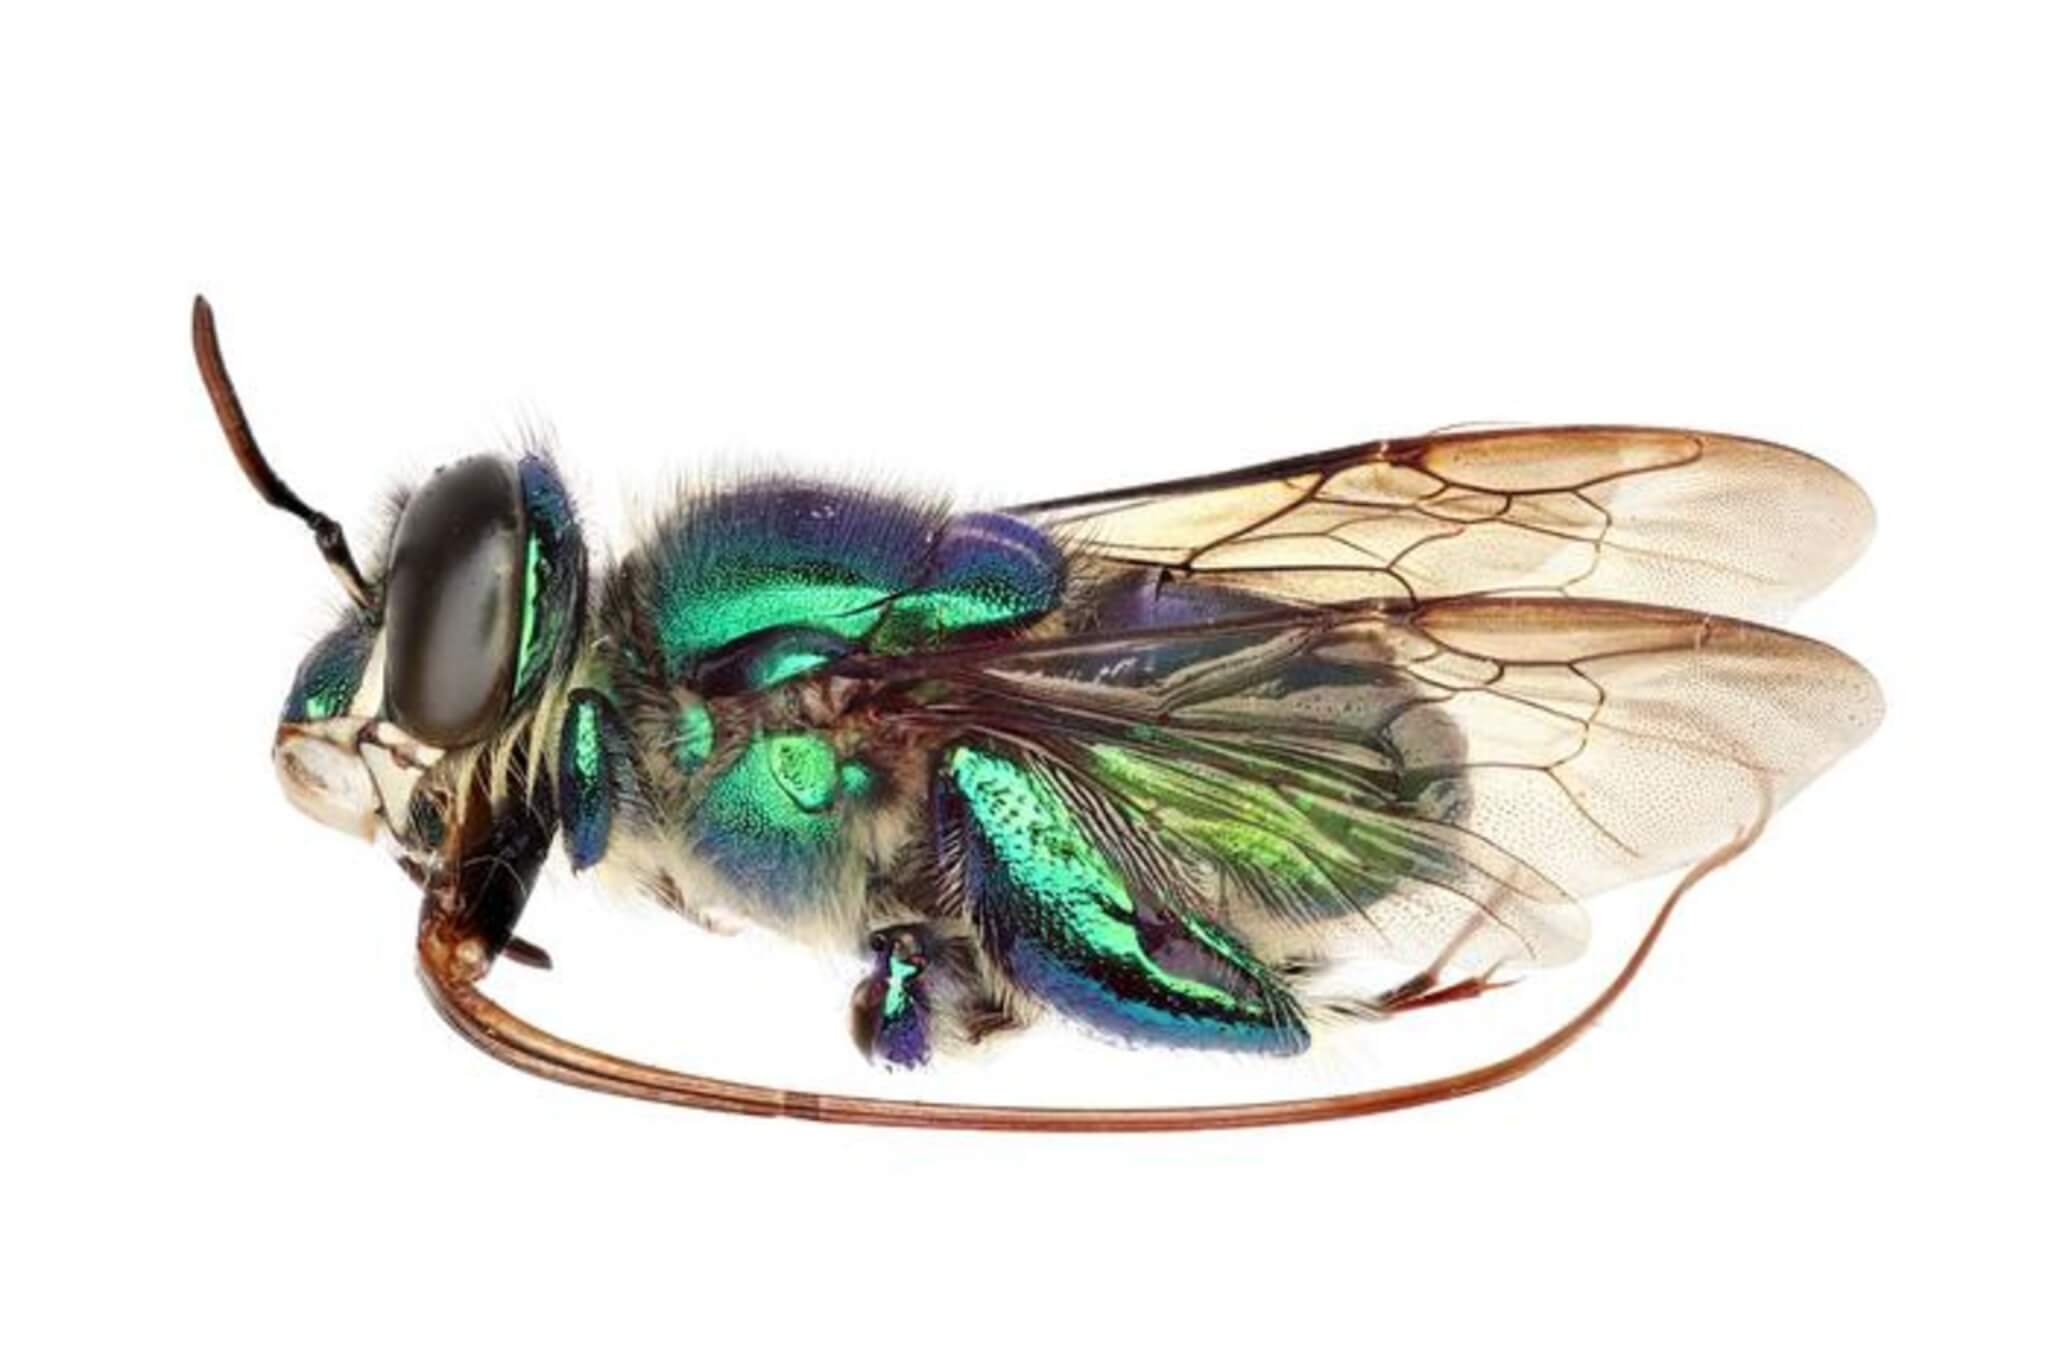 Photos of bees made using the team’s imaging system